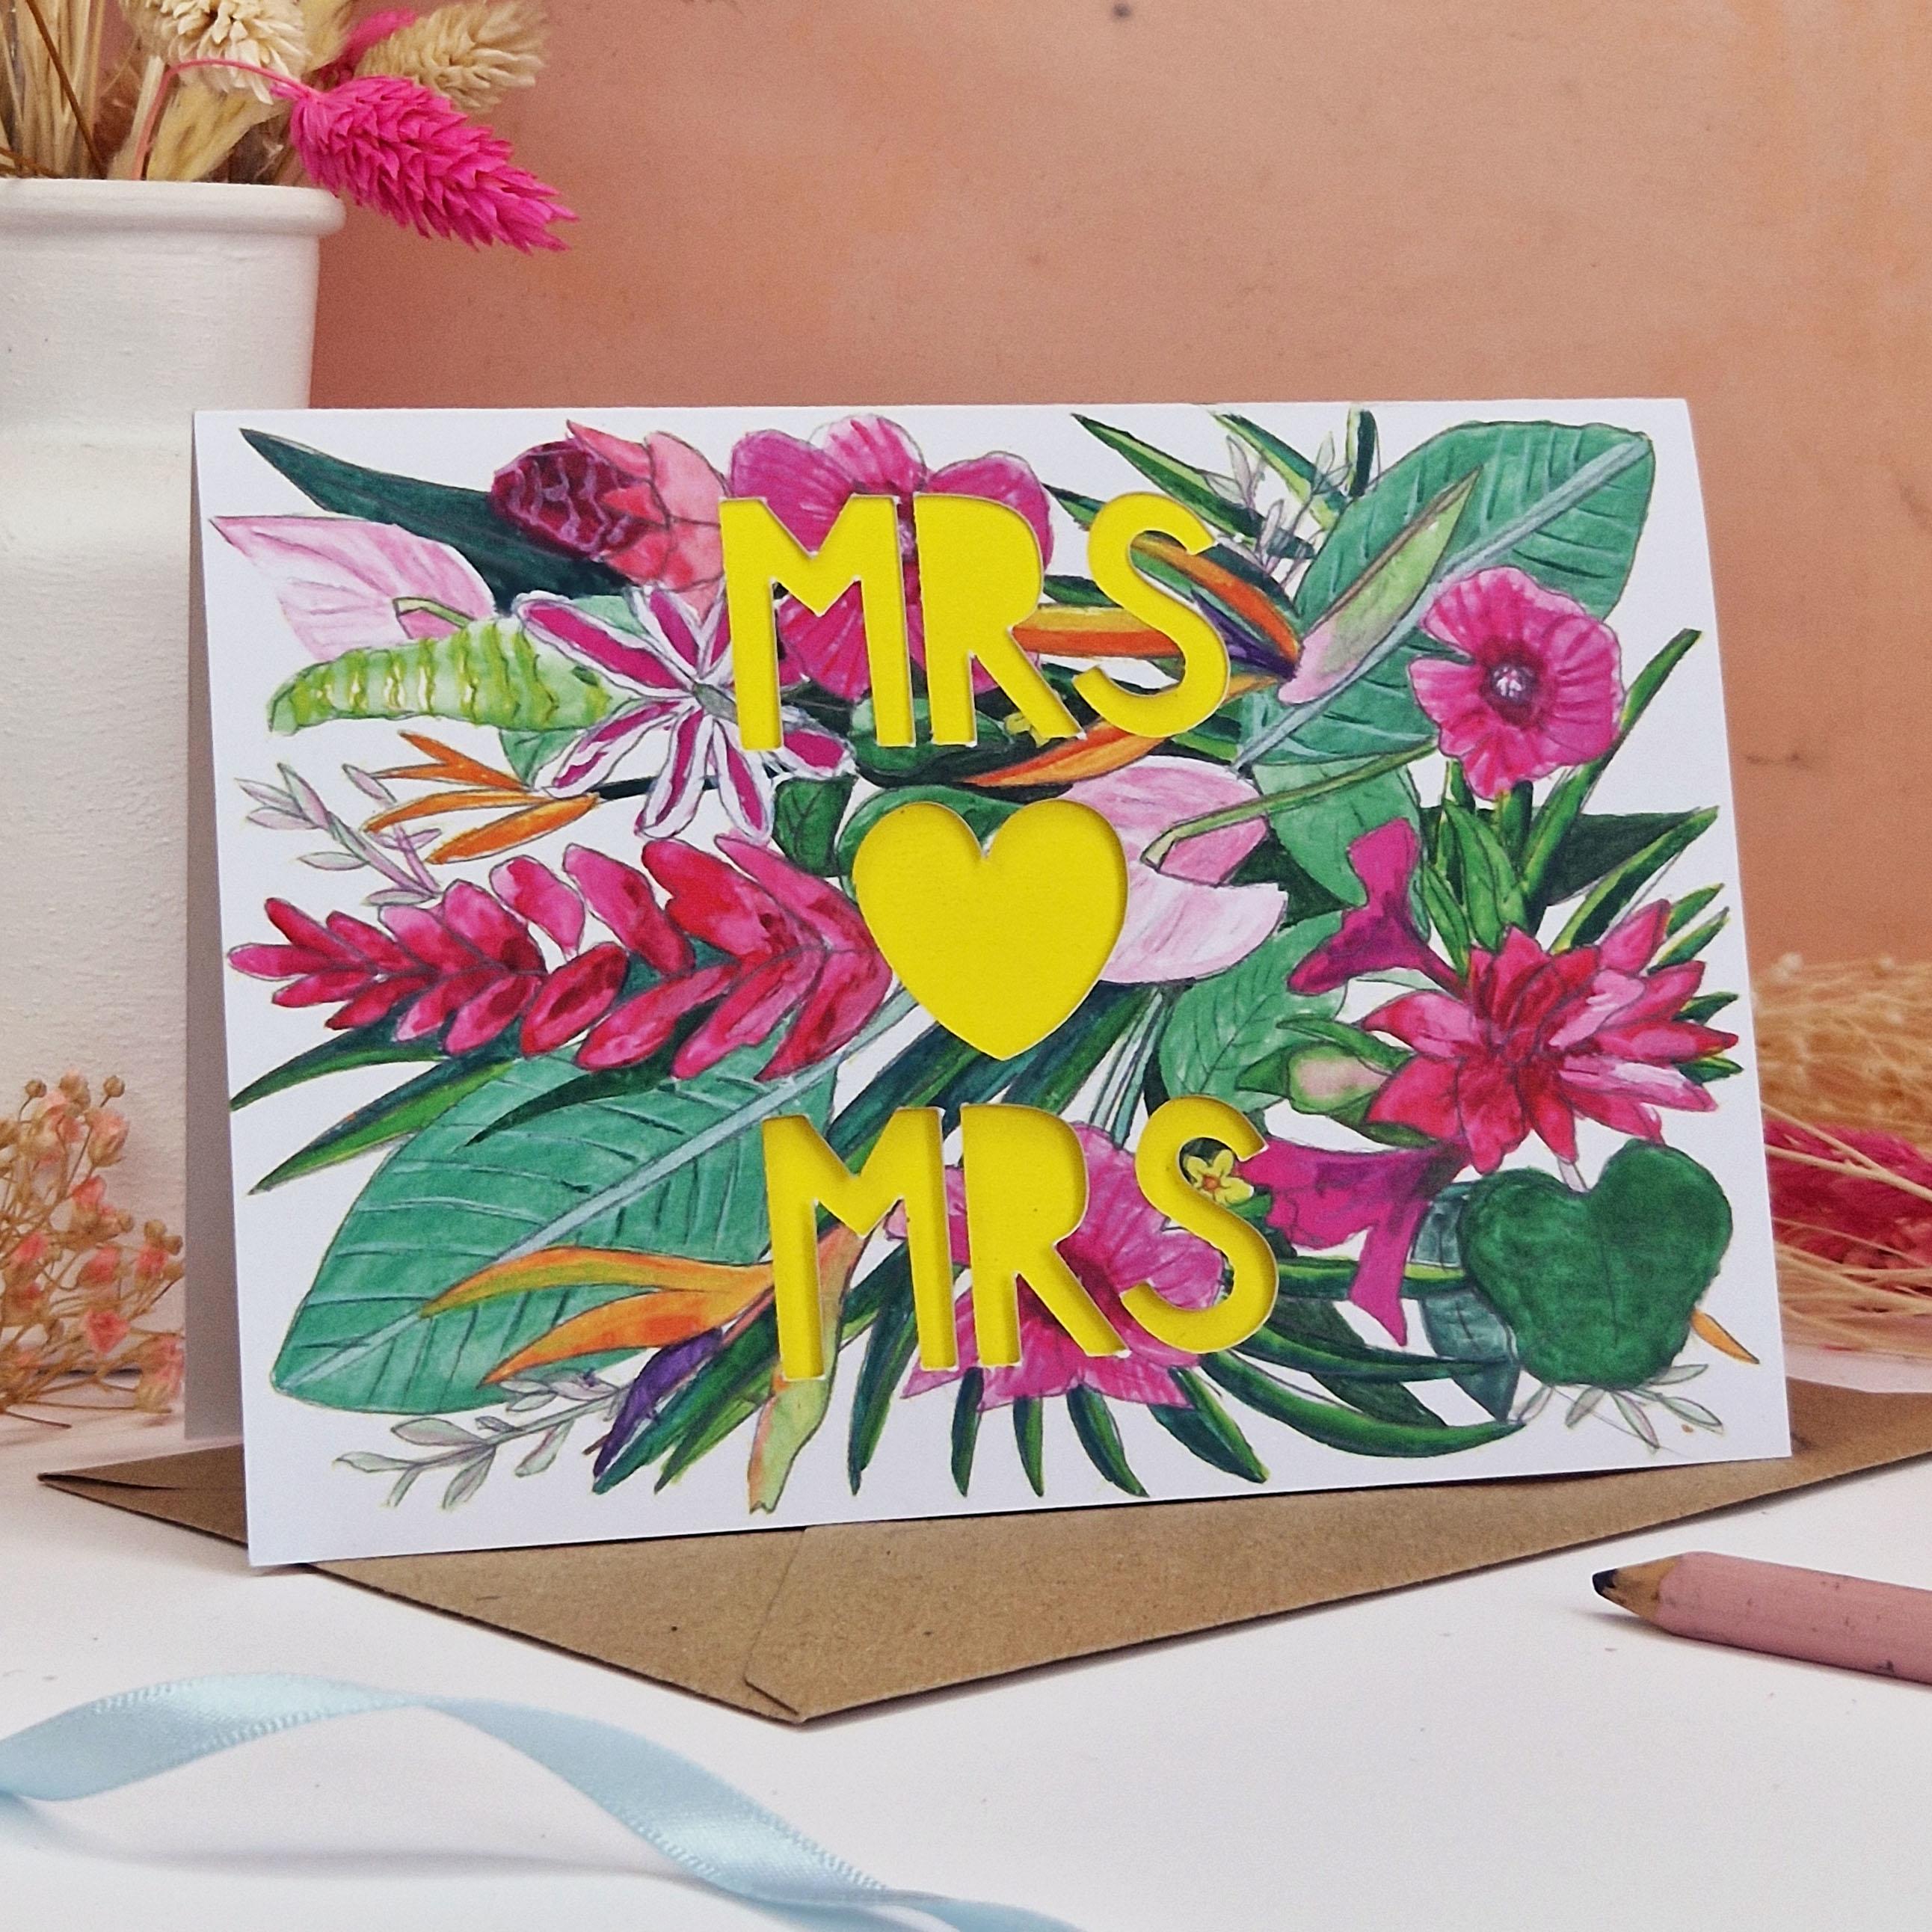 Floral Card with Paper cut text that says Mrs and Mrs with bright floral background.